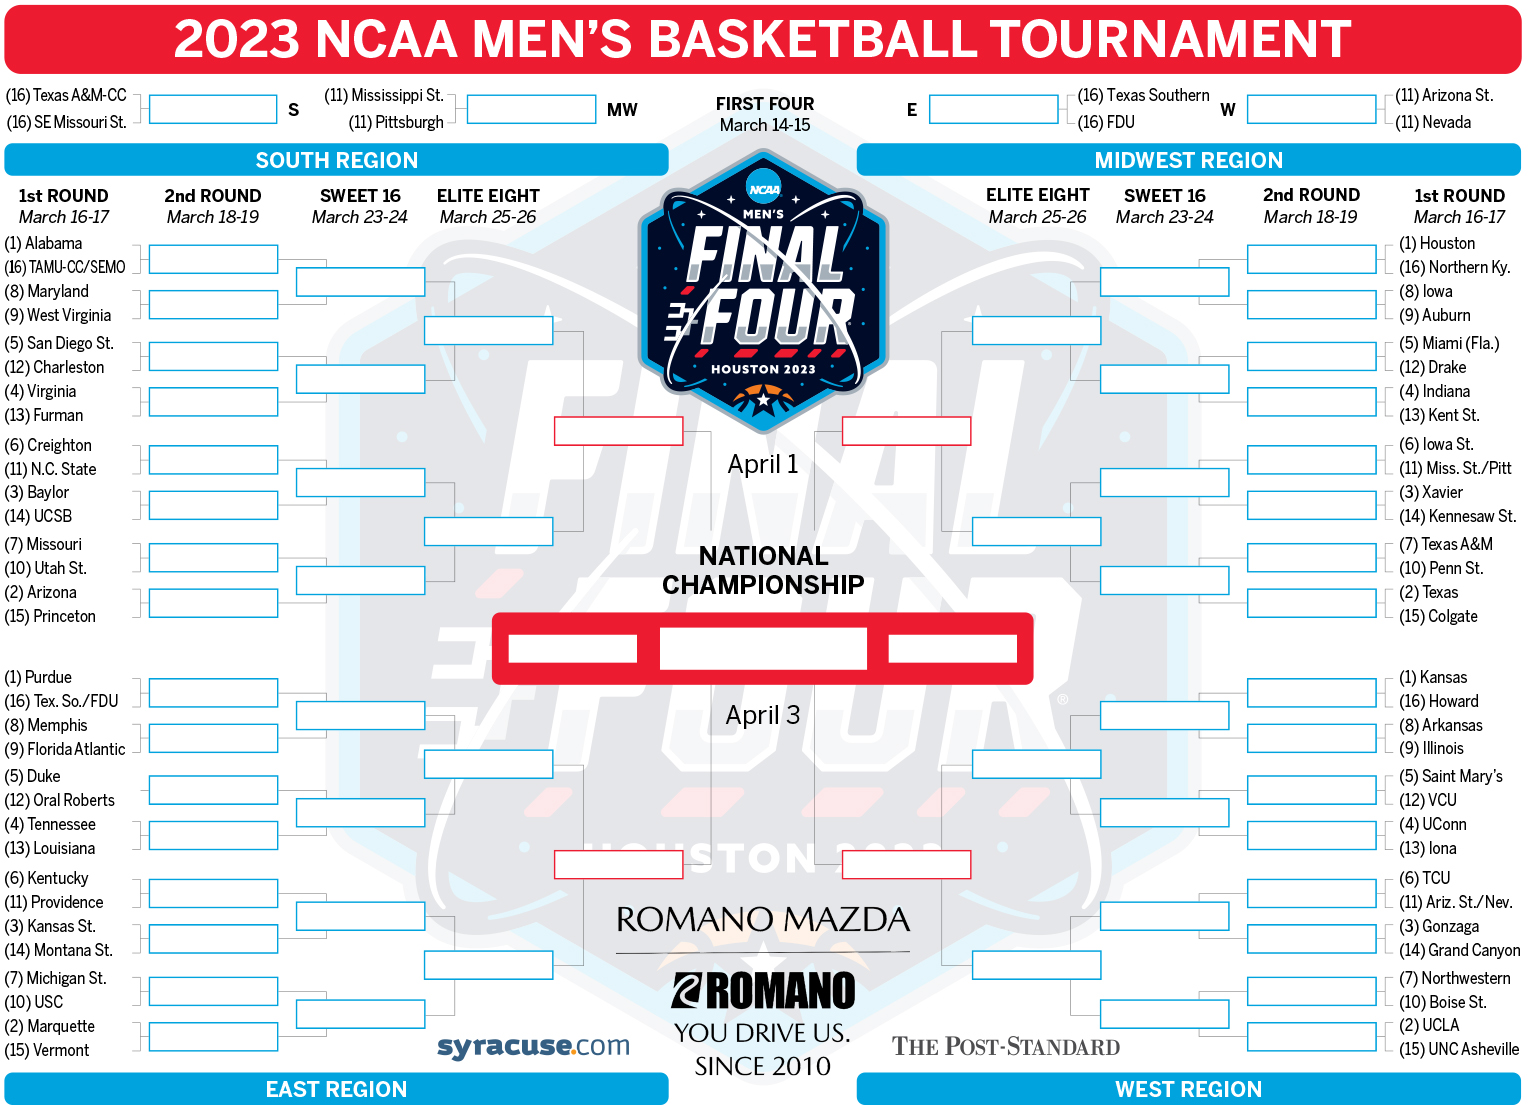 5. Purdue holds the fourth spot in the tournament bracket